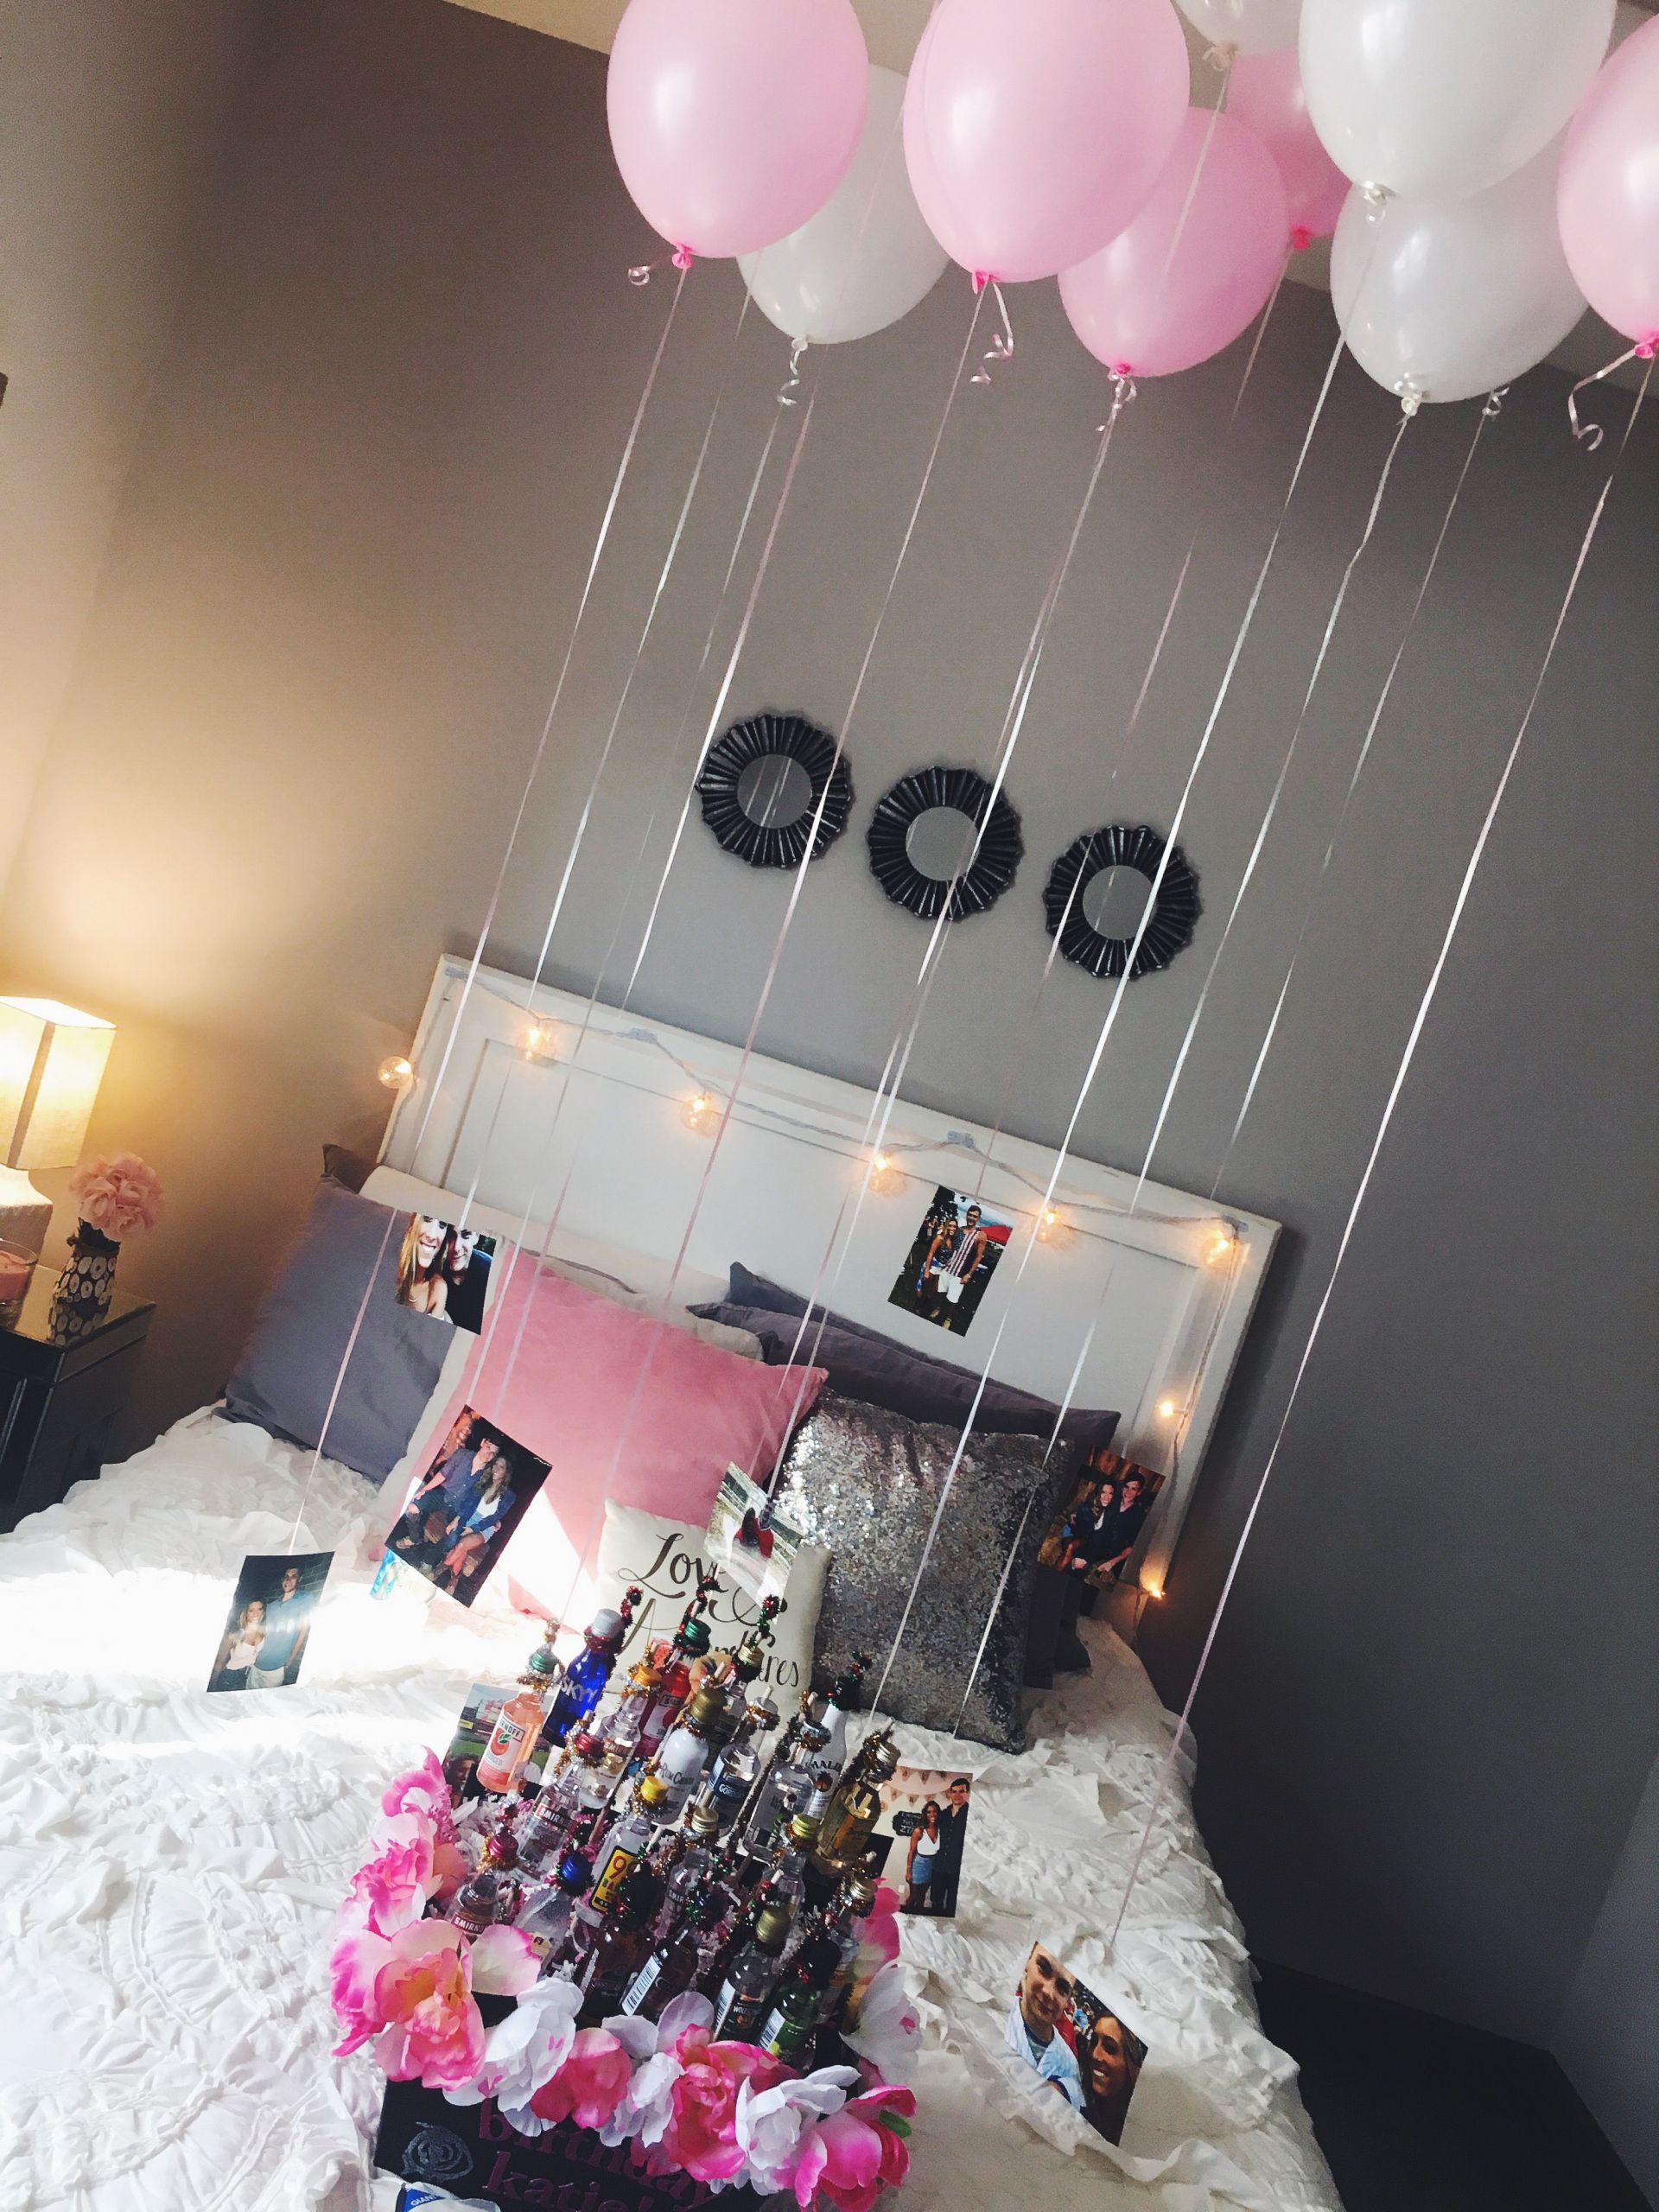 Gift Ideas To Make For Girlfriend
 easy and cute decorations for a friend or girlfriends 21st birthday